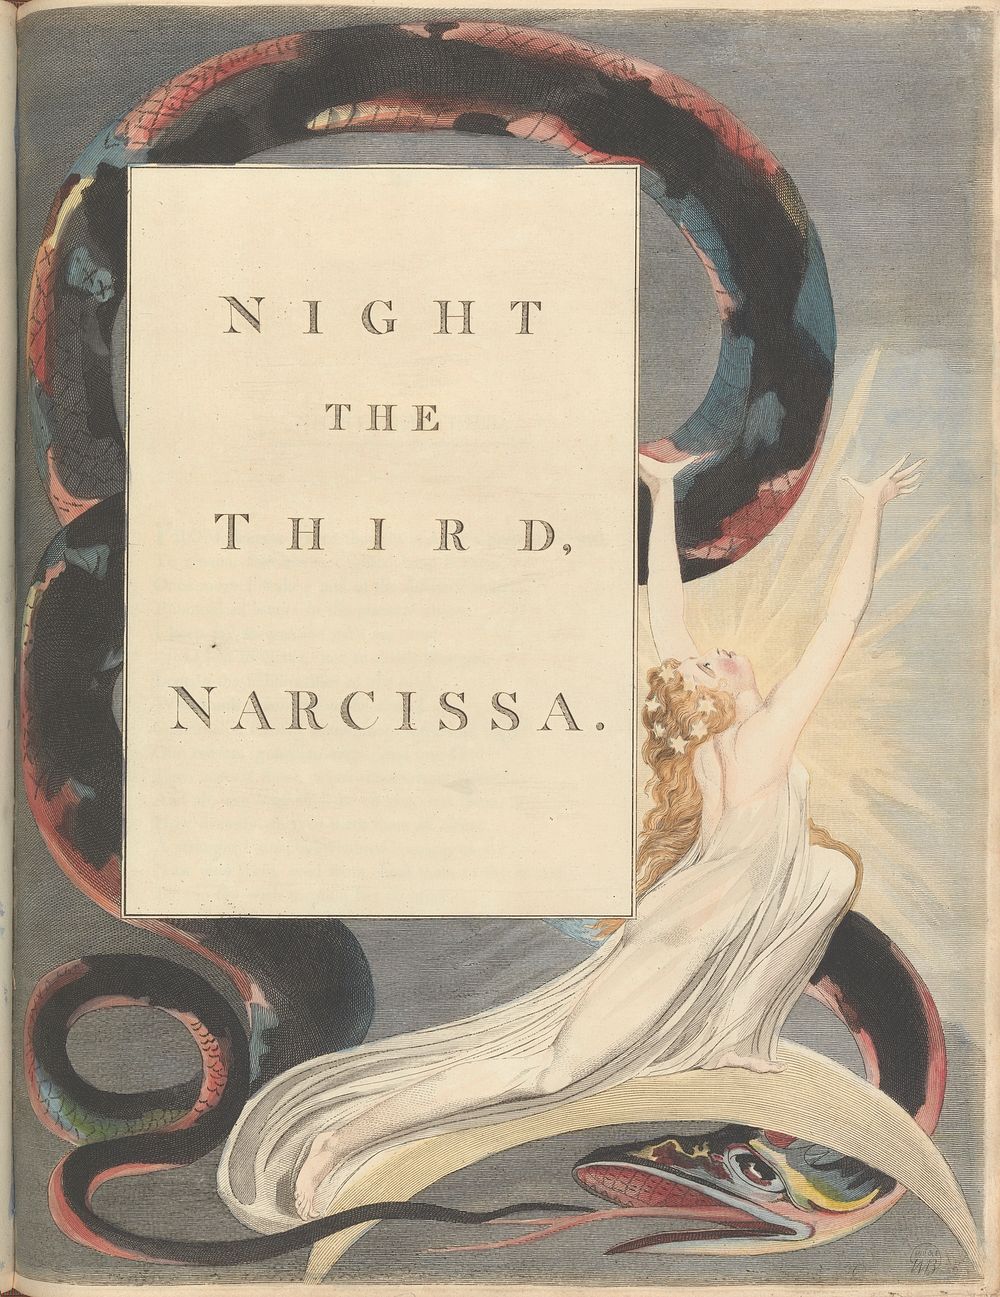 Young's Night Thoughts, Page 43, "Night the Third, Narcissa."by William Blake. 